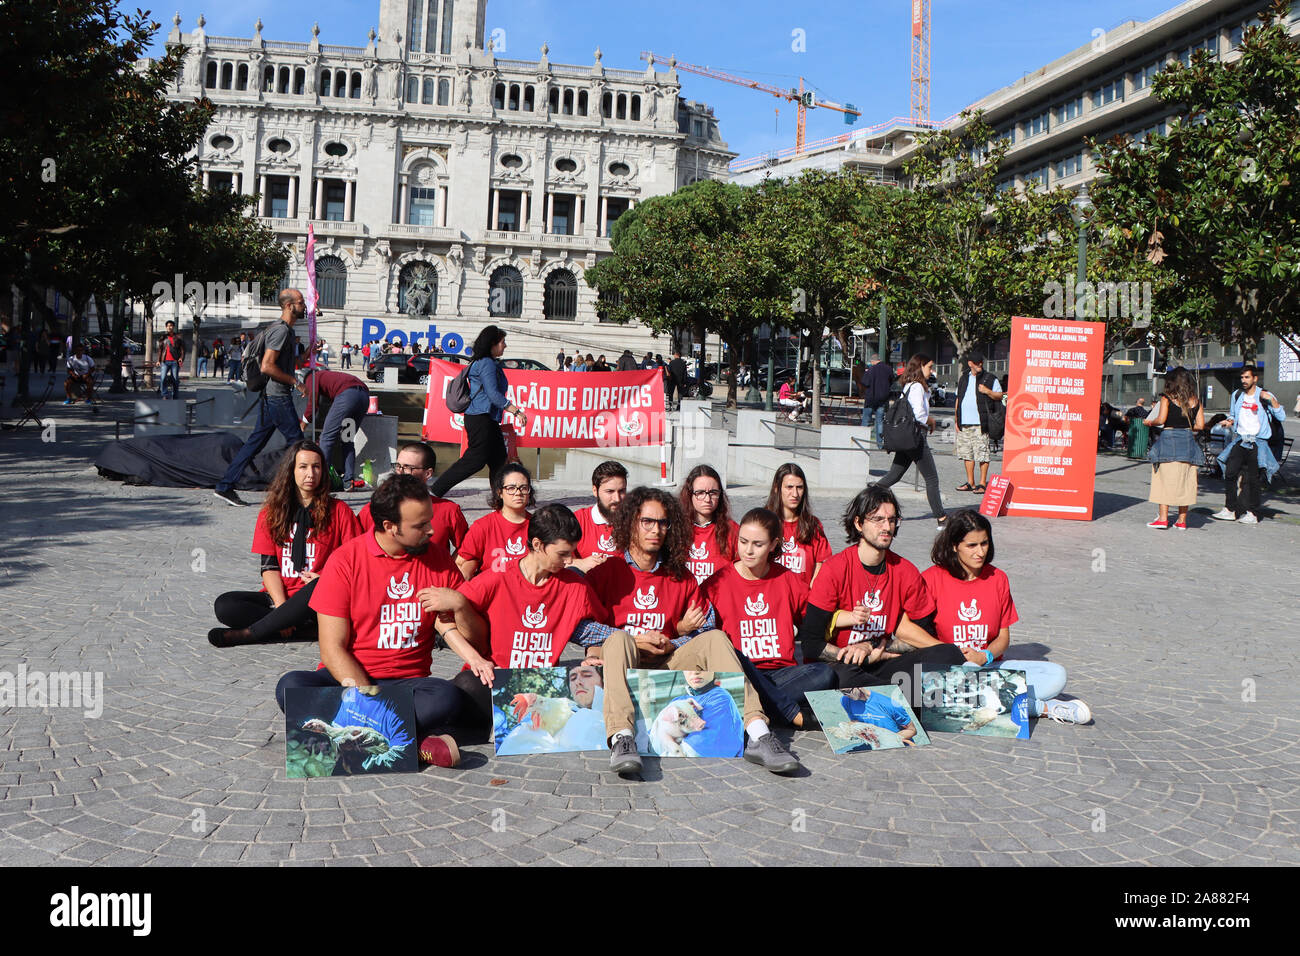 Porto, Portugal - October 05, 2019: Group of young activists are protesting for animal rights. Fight for animals. Stock Photo